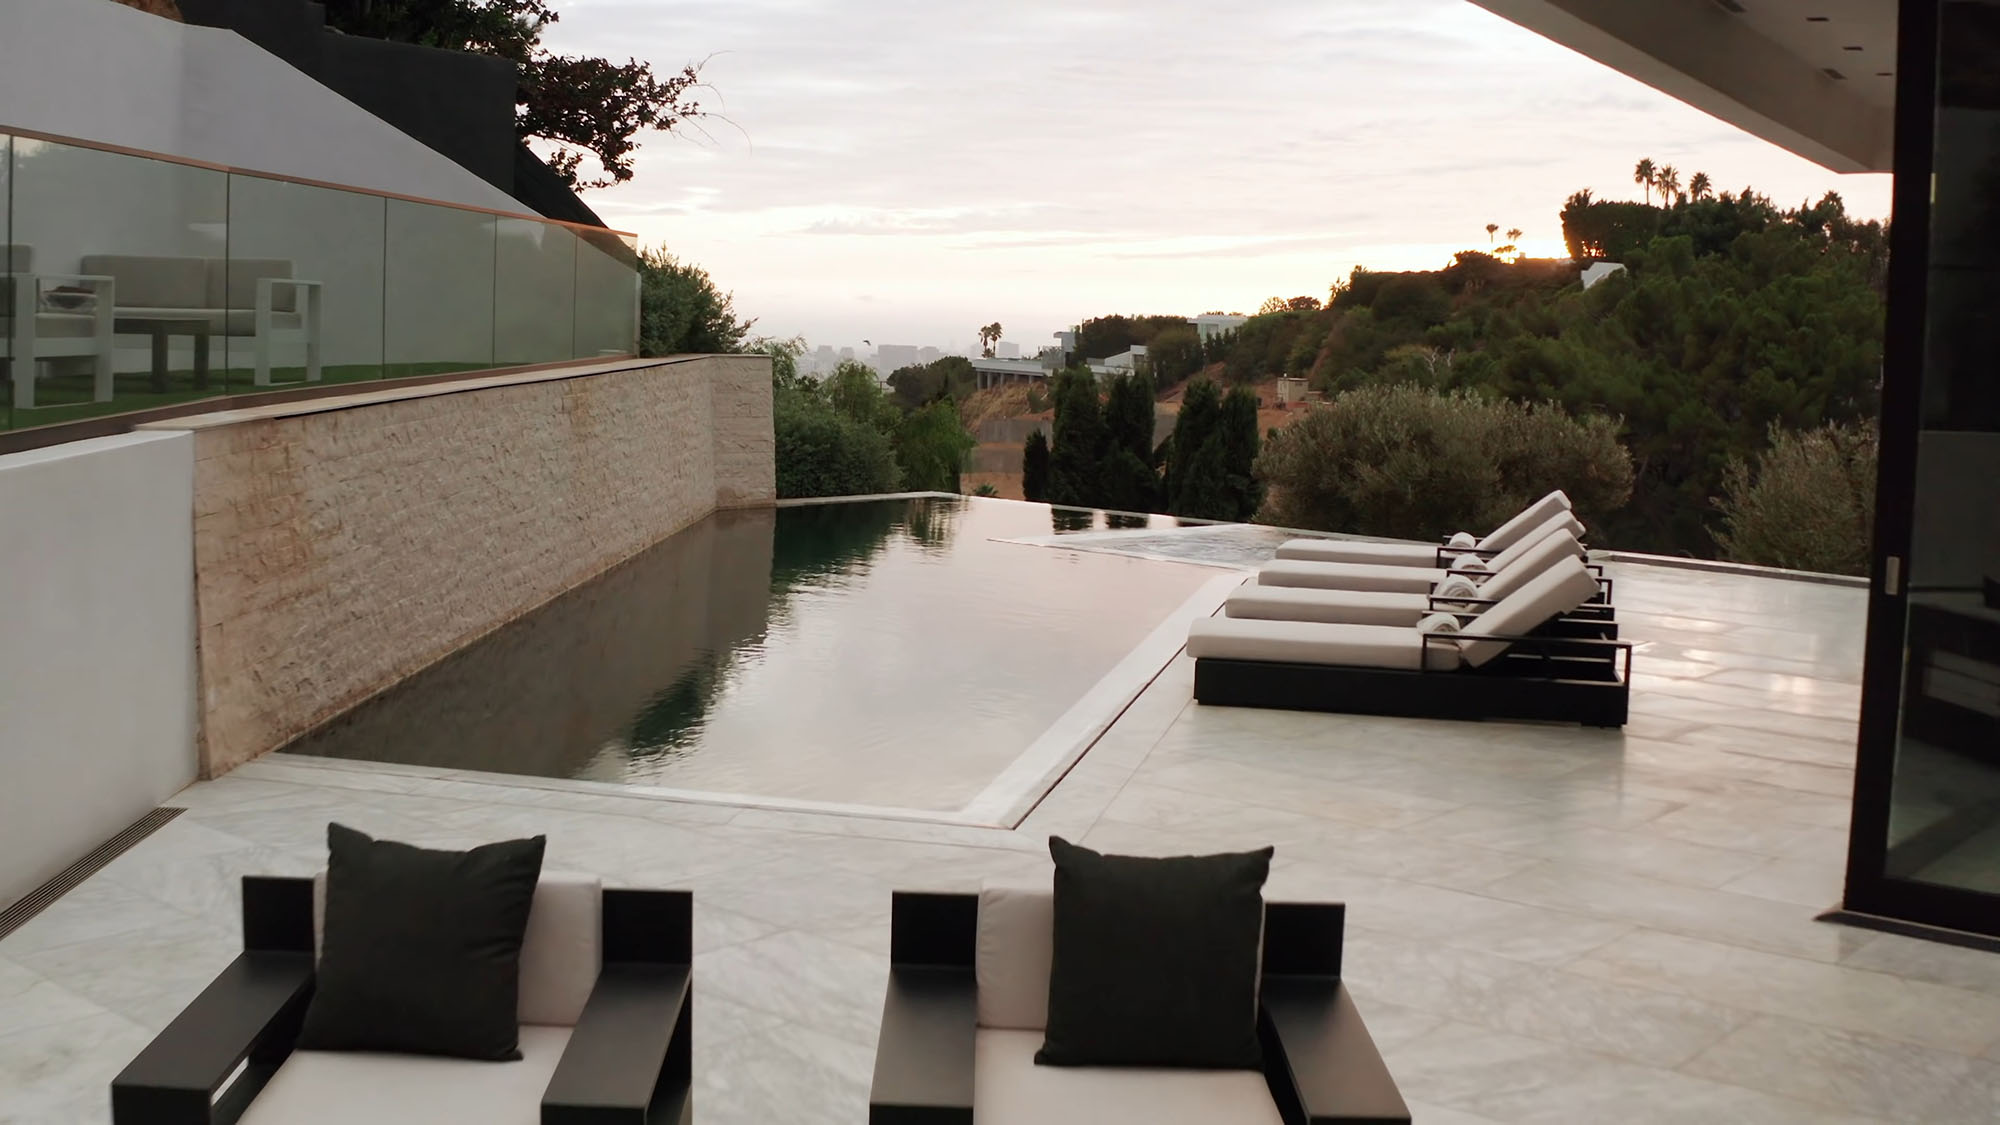 More spectacular views from a California modern home with infinity edge pool. Beautiful modern patio furniture.